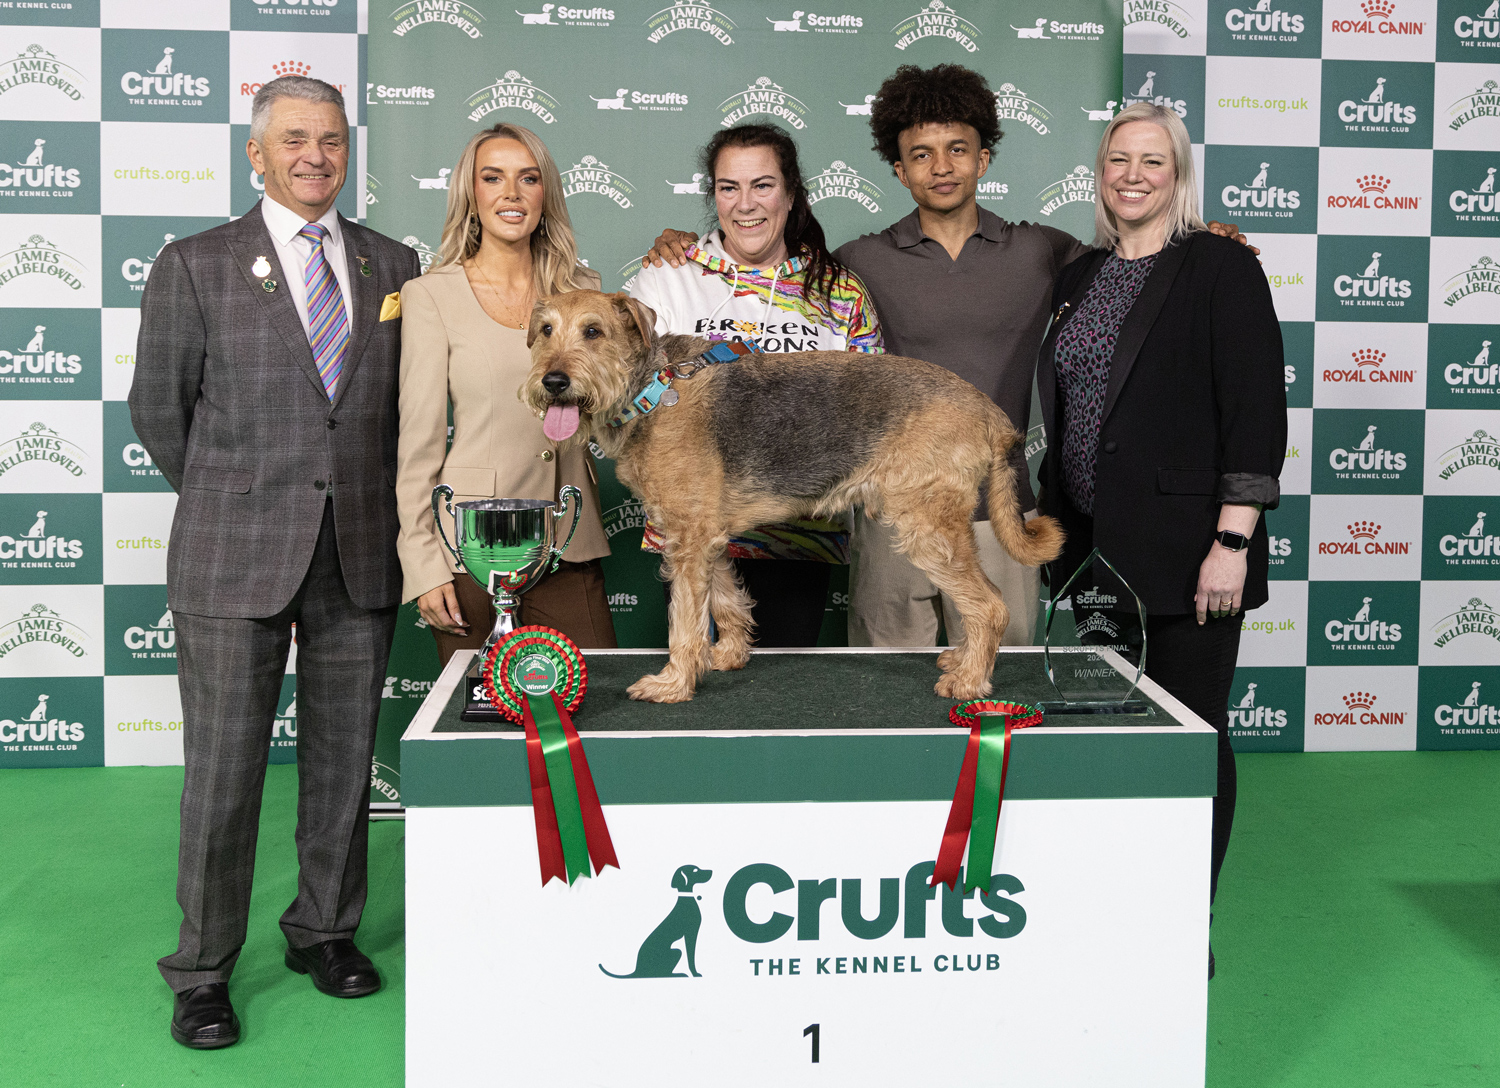 Five people pose behind a black and tan dog that stands on a table with ribbons and trophies.